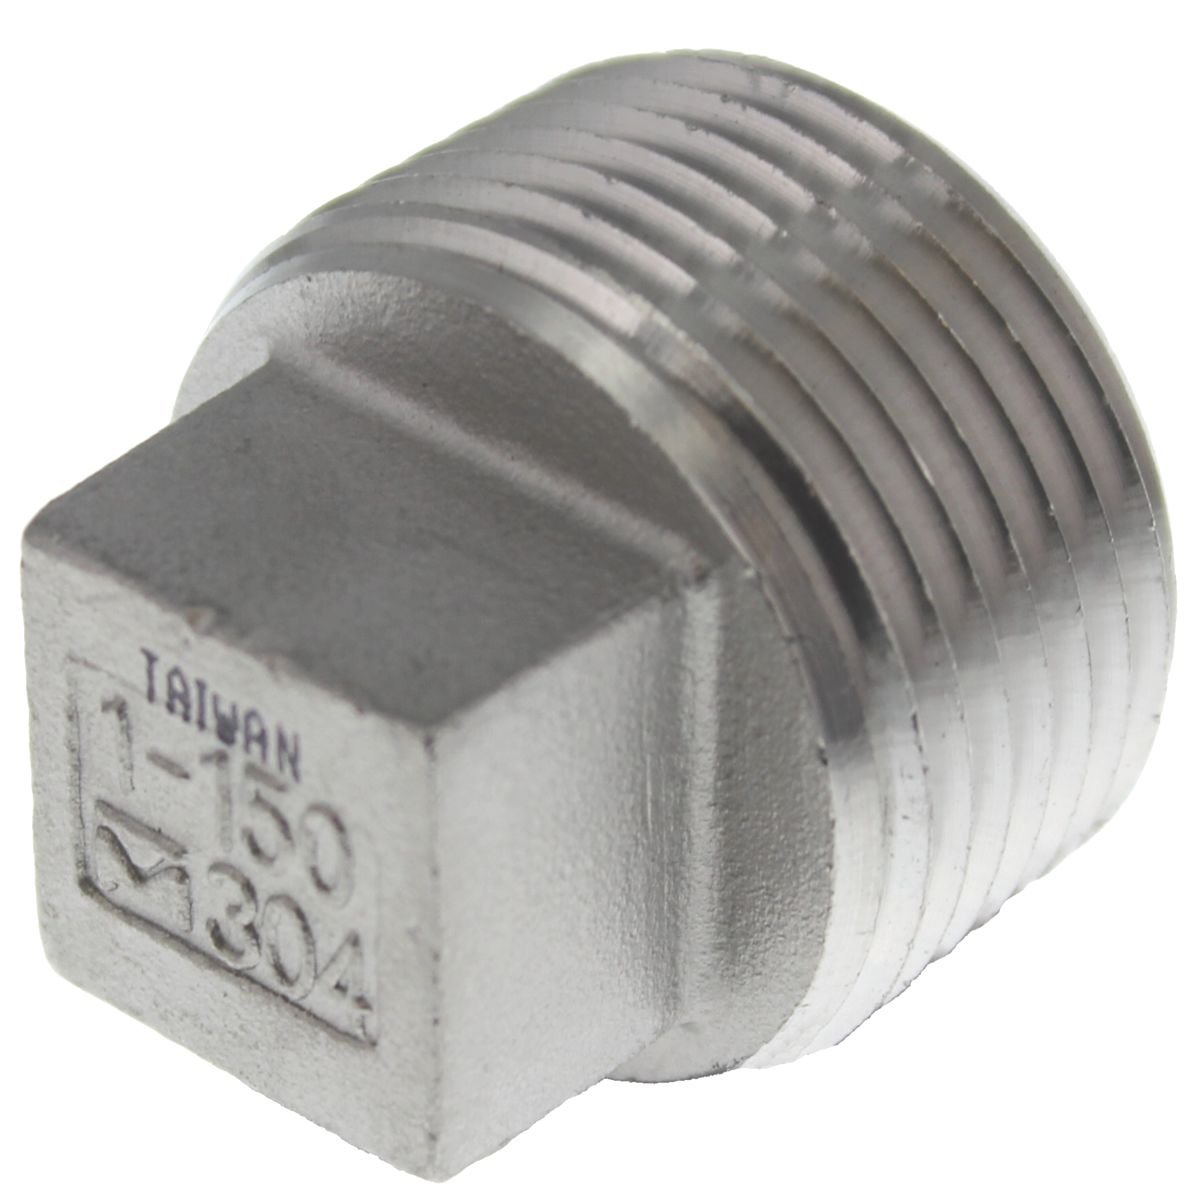 304 Stainless Steel Pipe Fitting 1-1/2" Square Head Plug